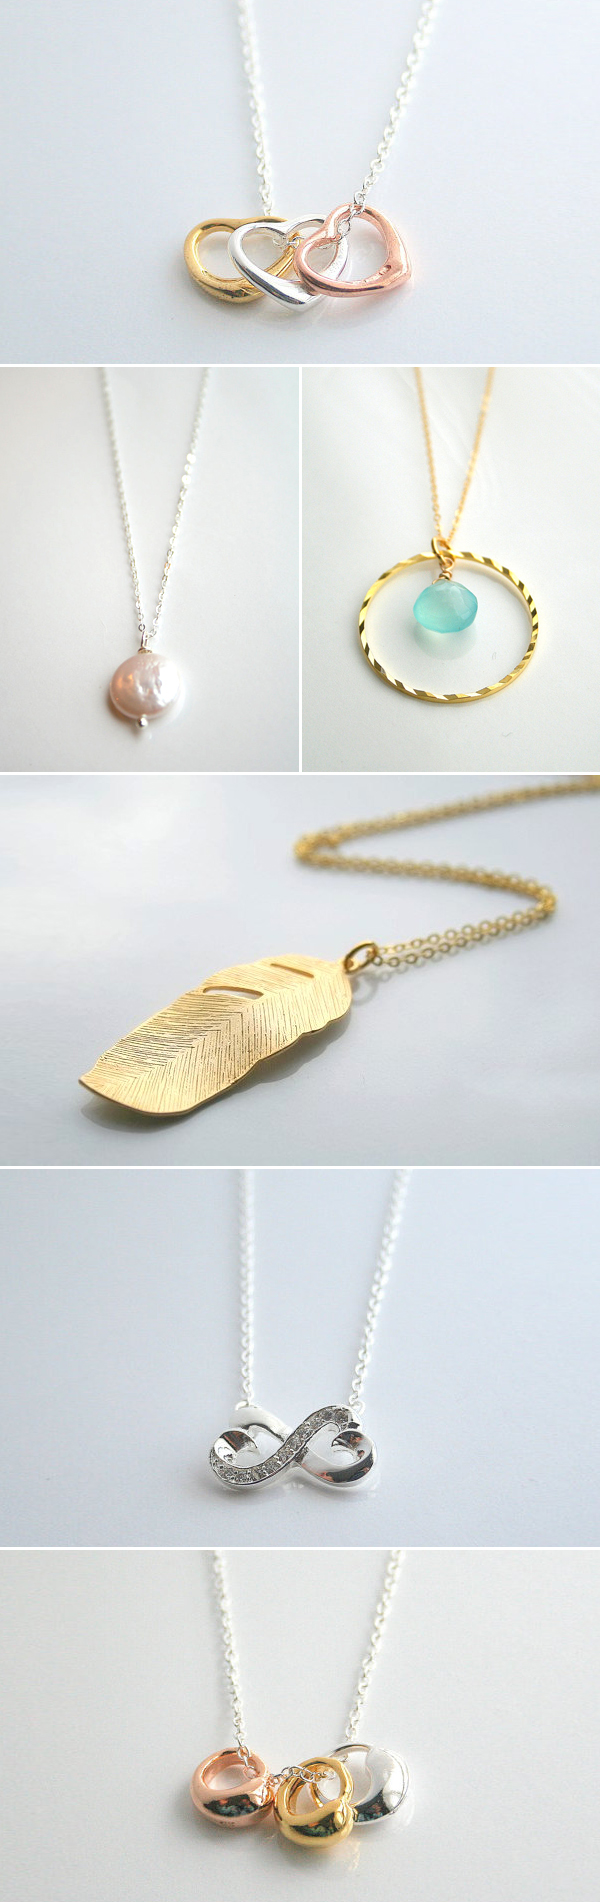 MCT-Design01-necklace